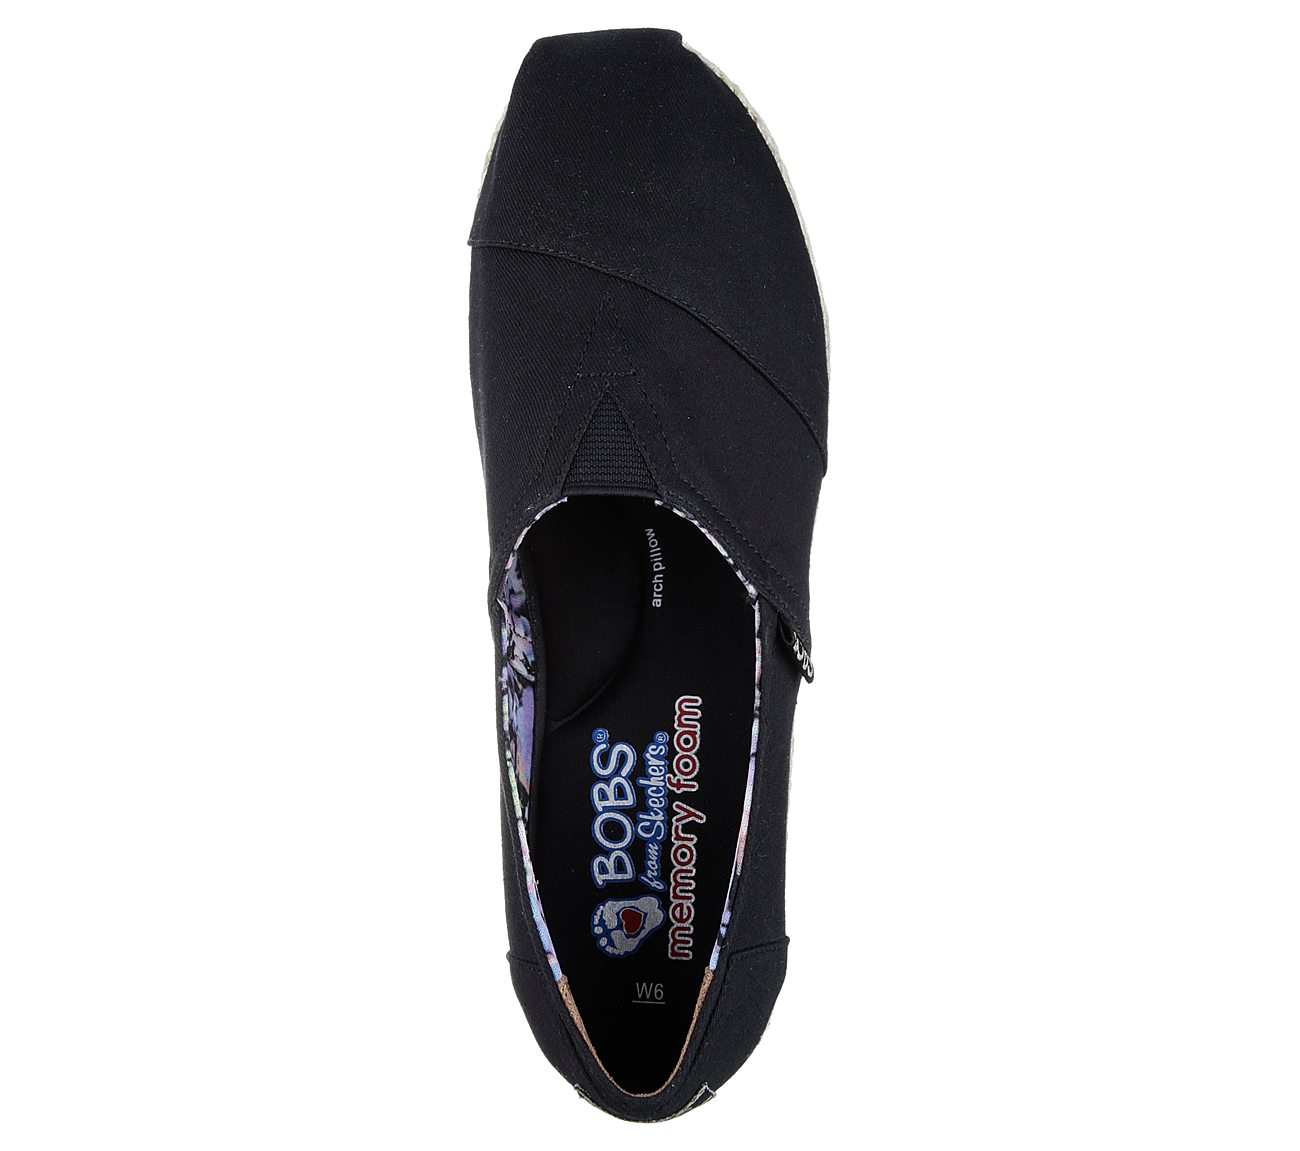 Buy SKECHERS Bobs - Highlights BOBS Shoes